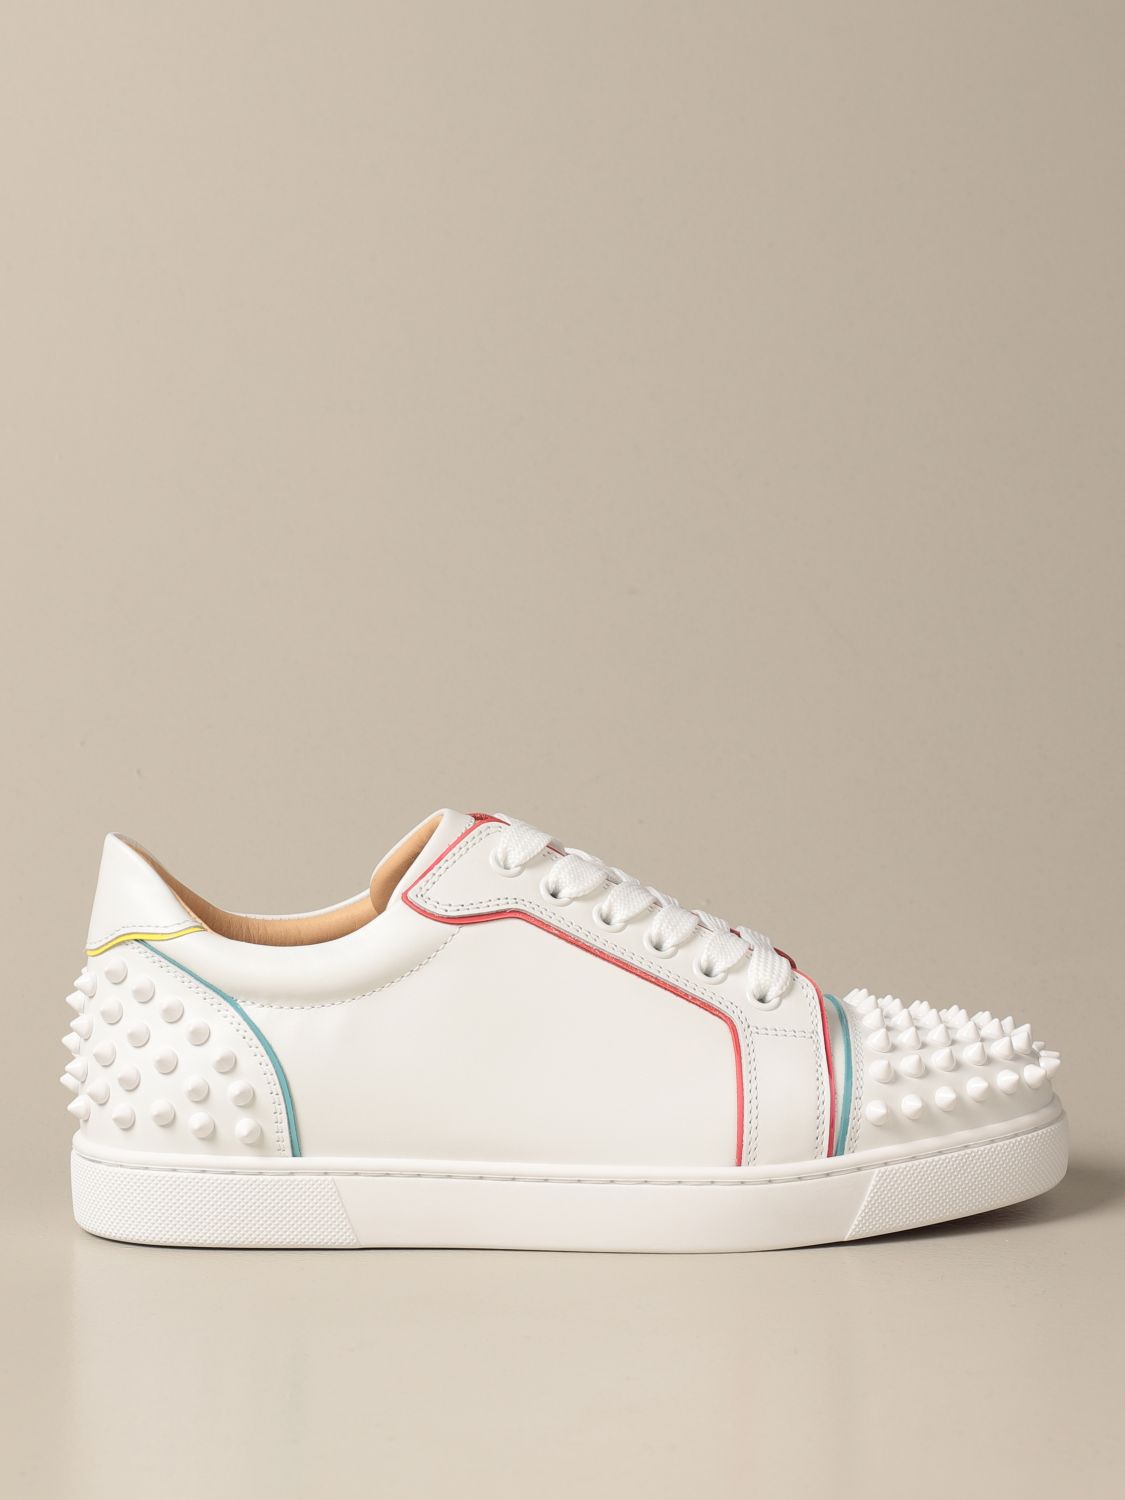 Christian Louboutin Vieira sneakers in leather with studs